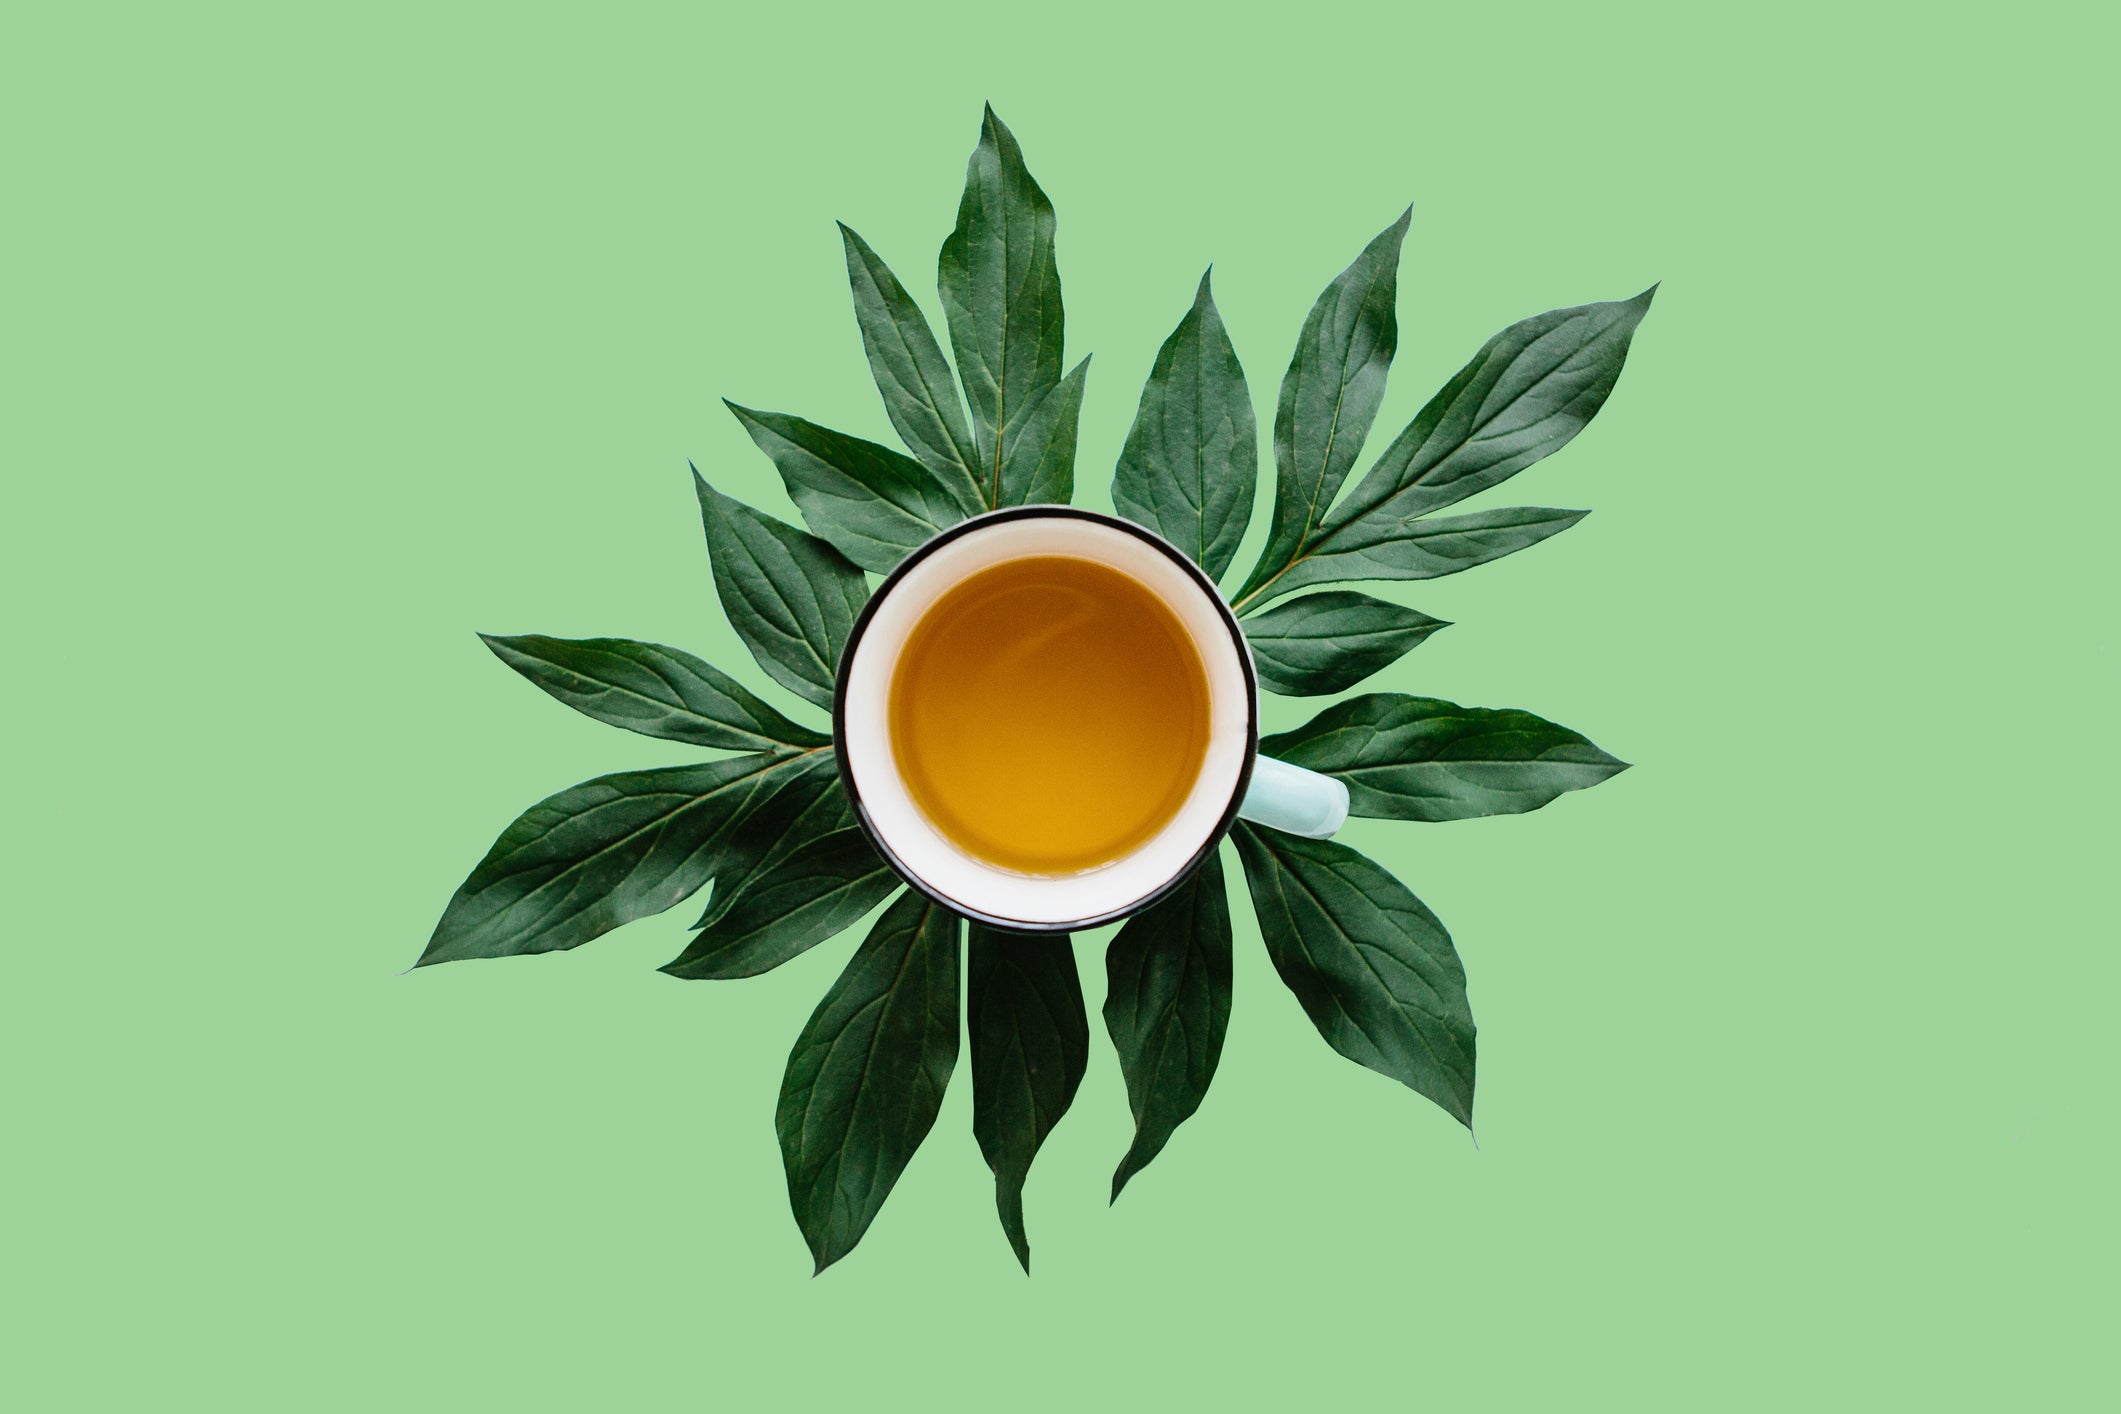 Some tea detox companies use senna, a natural laxative, which has caused waves on social media